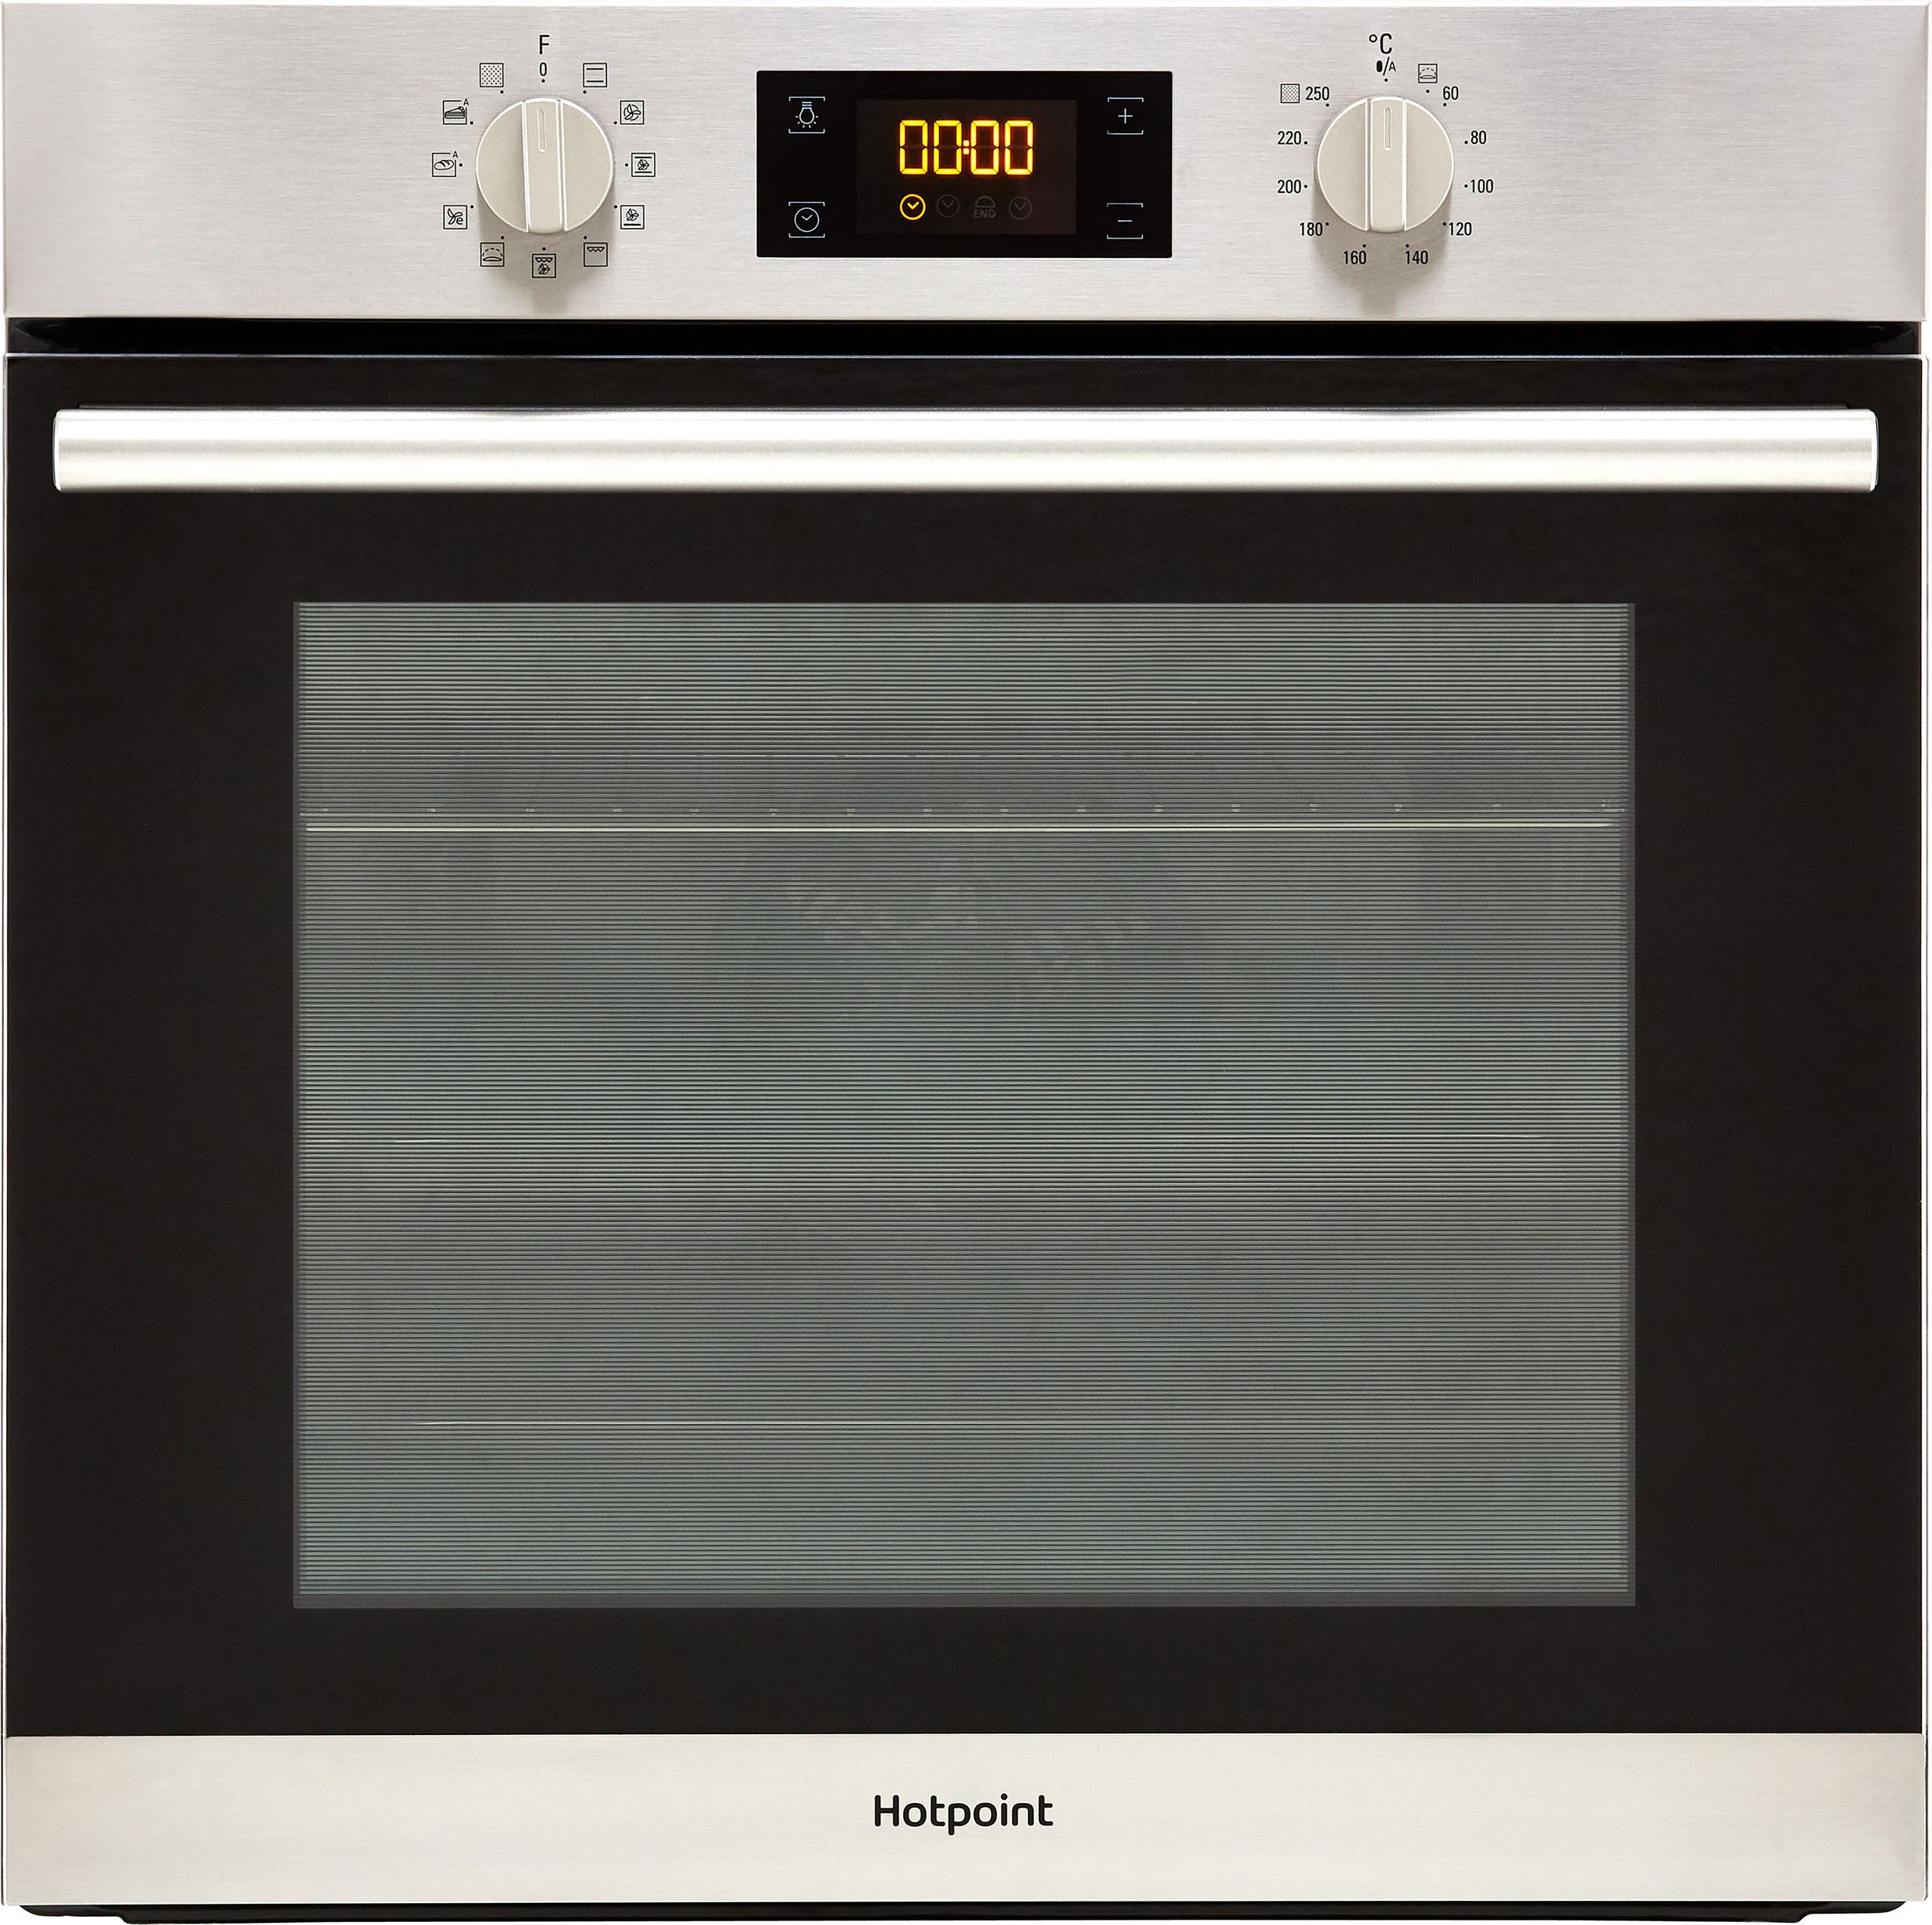 Hotpoint Class 2 SA2840PIX Built In Electric Single Oven and Pyrolytic Cleaning - Stainless Steel - A+ Rated, Stainless Steel